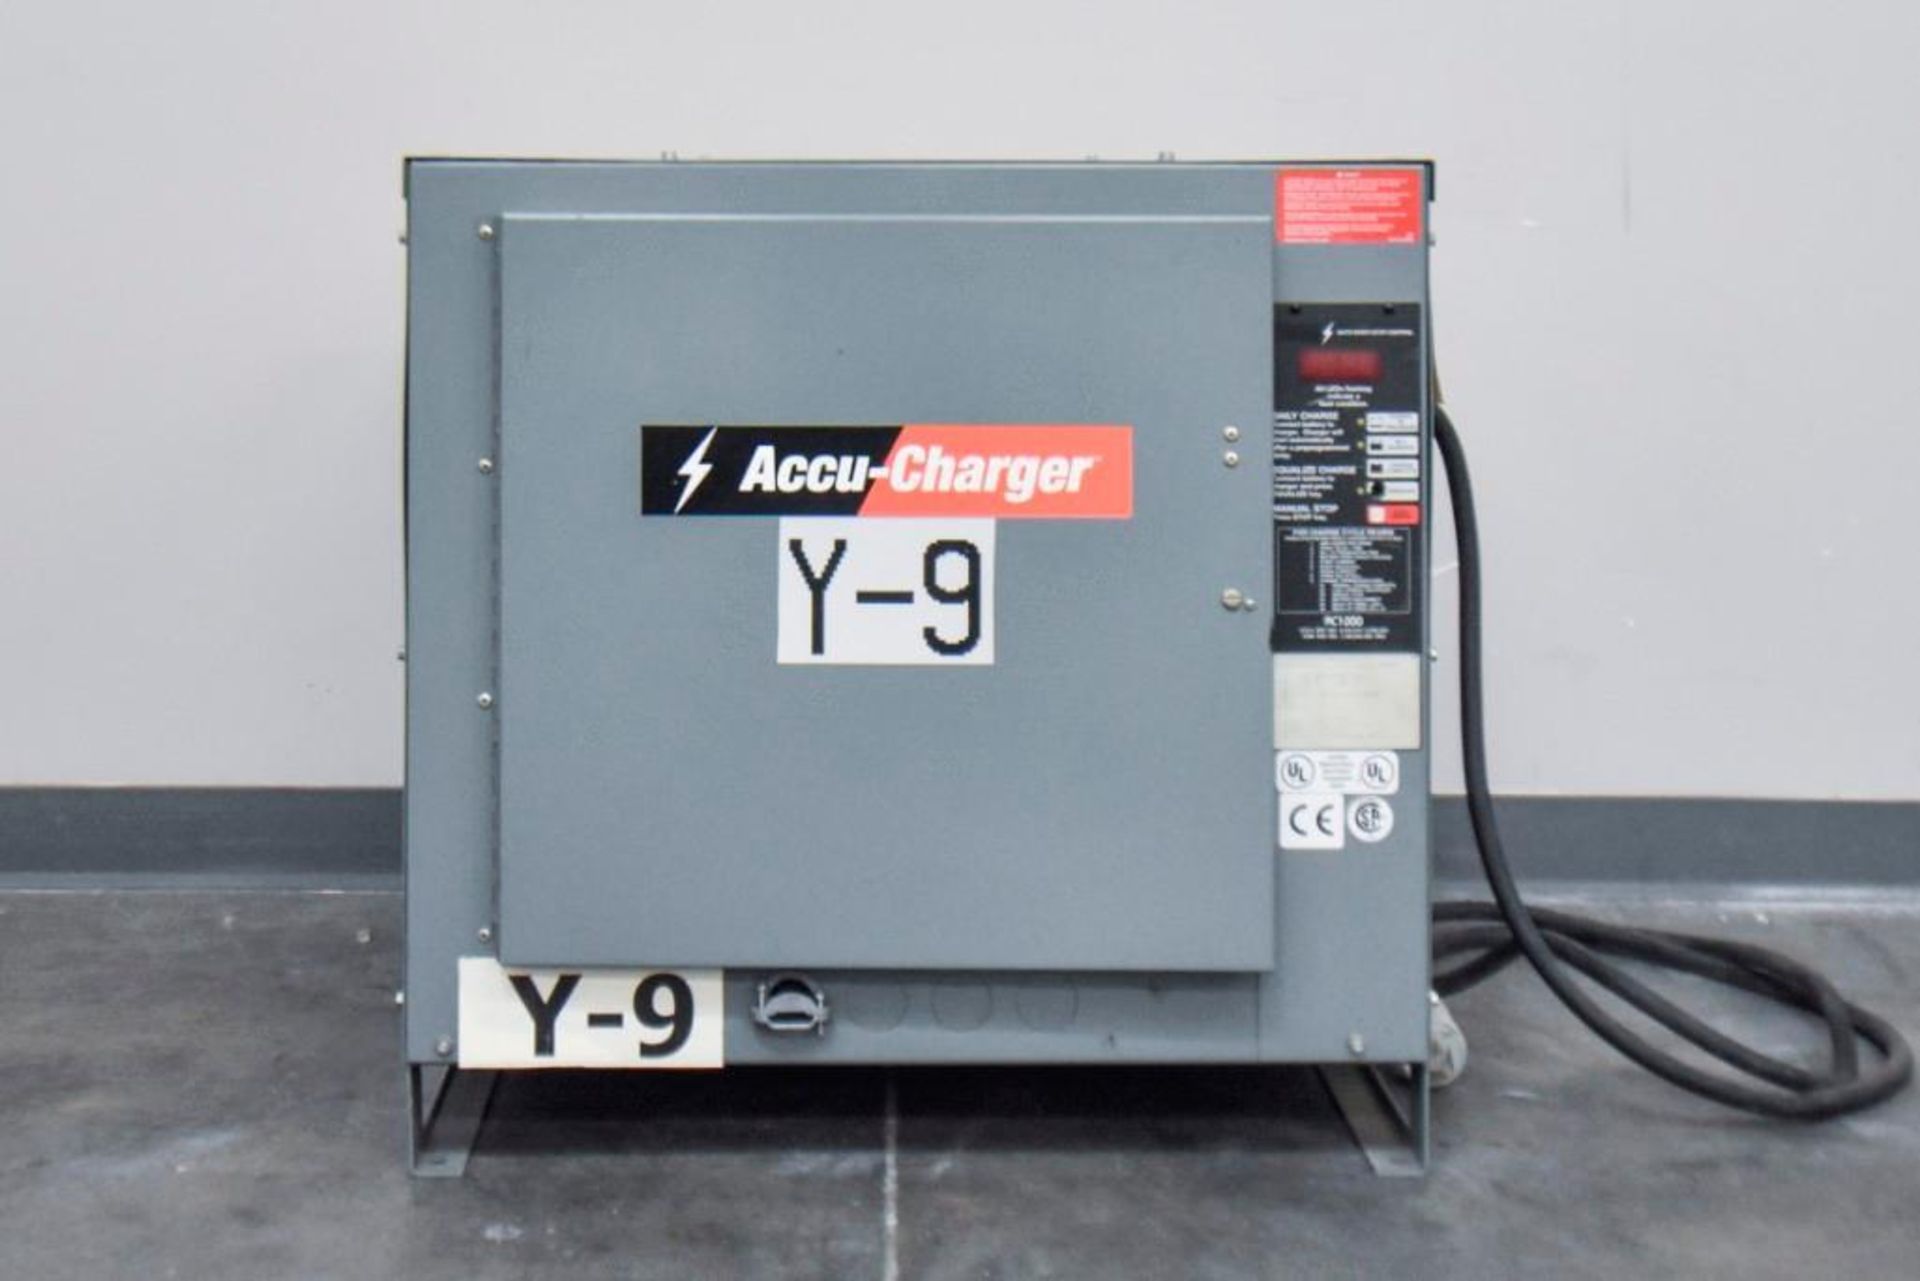 Accu Charger Y-9